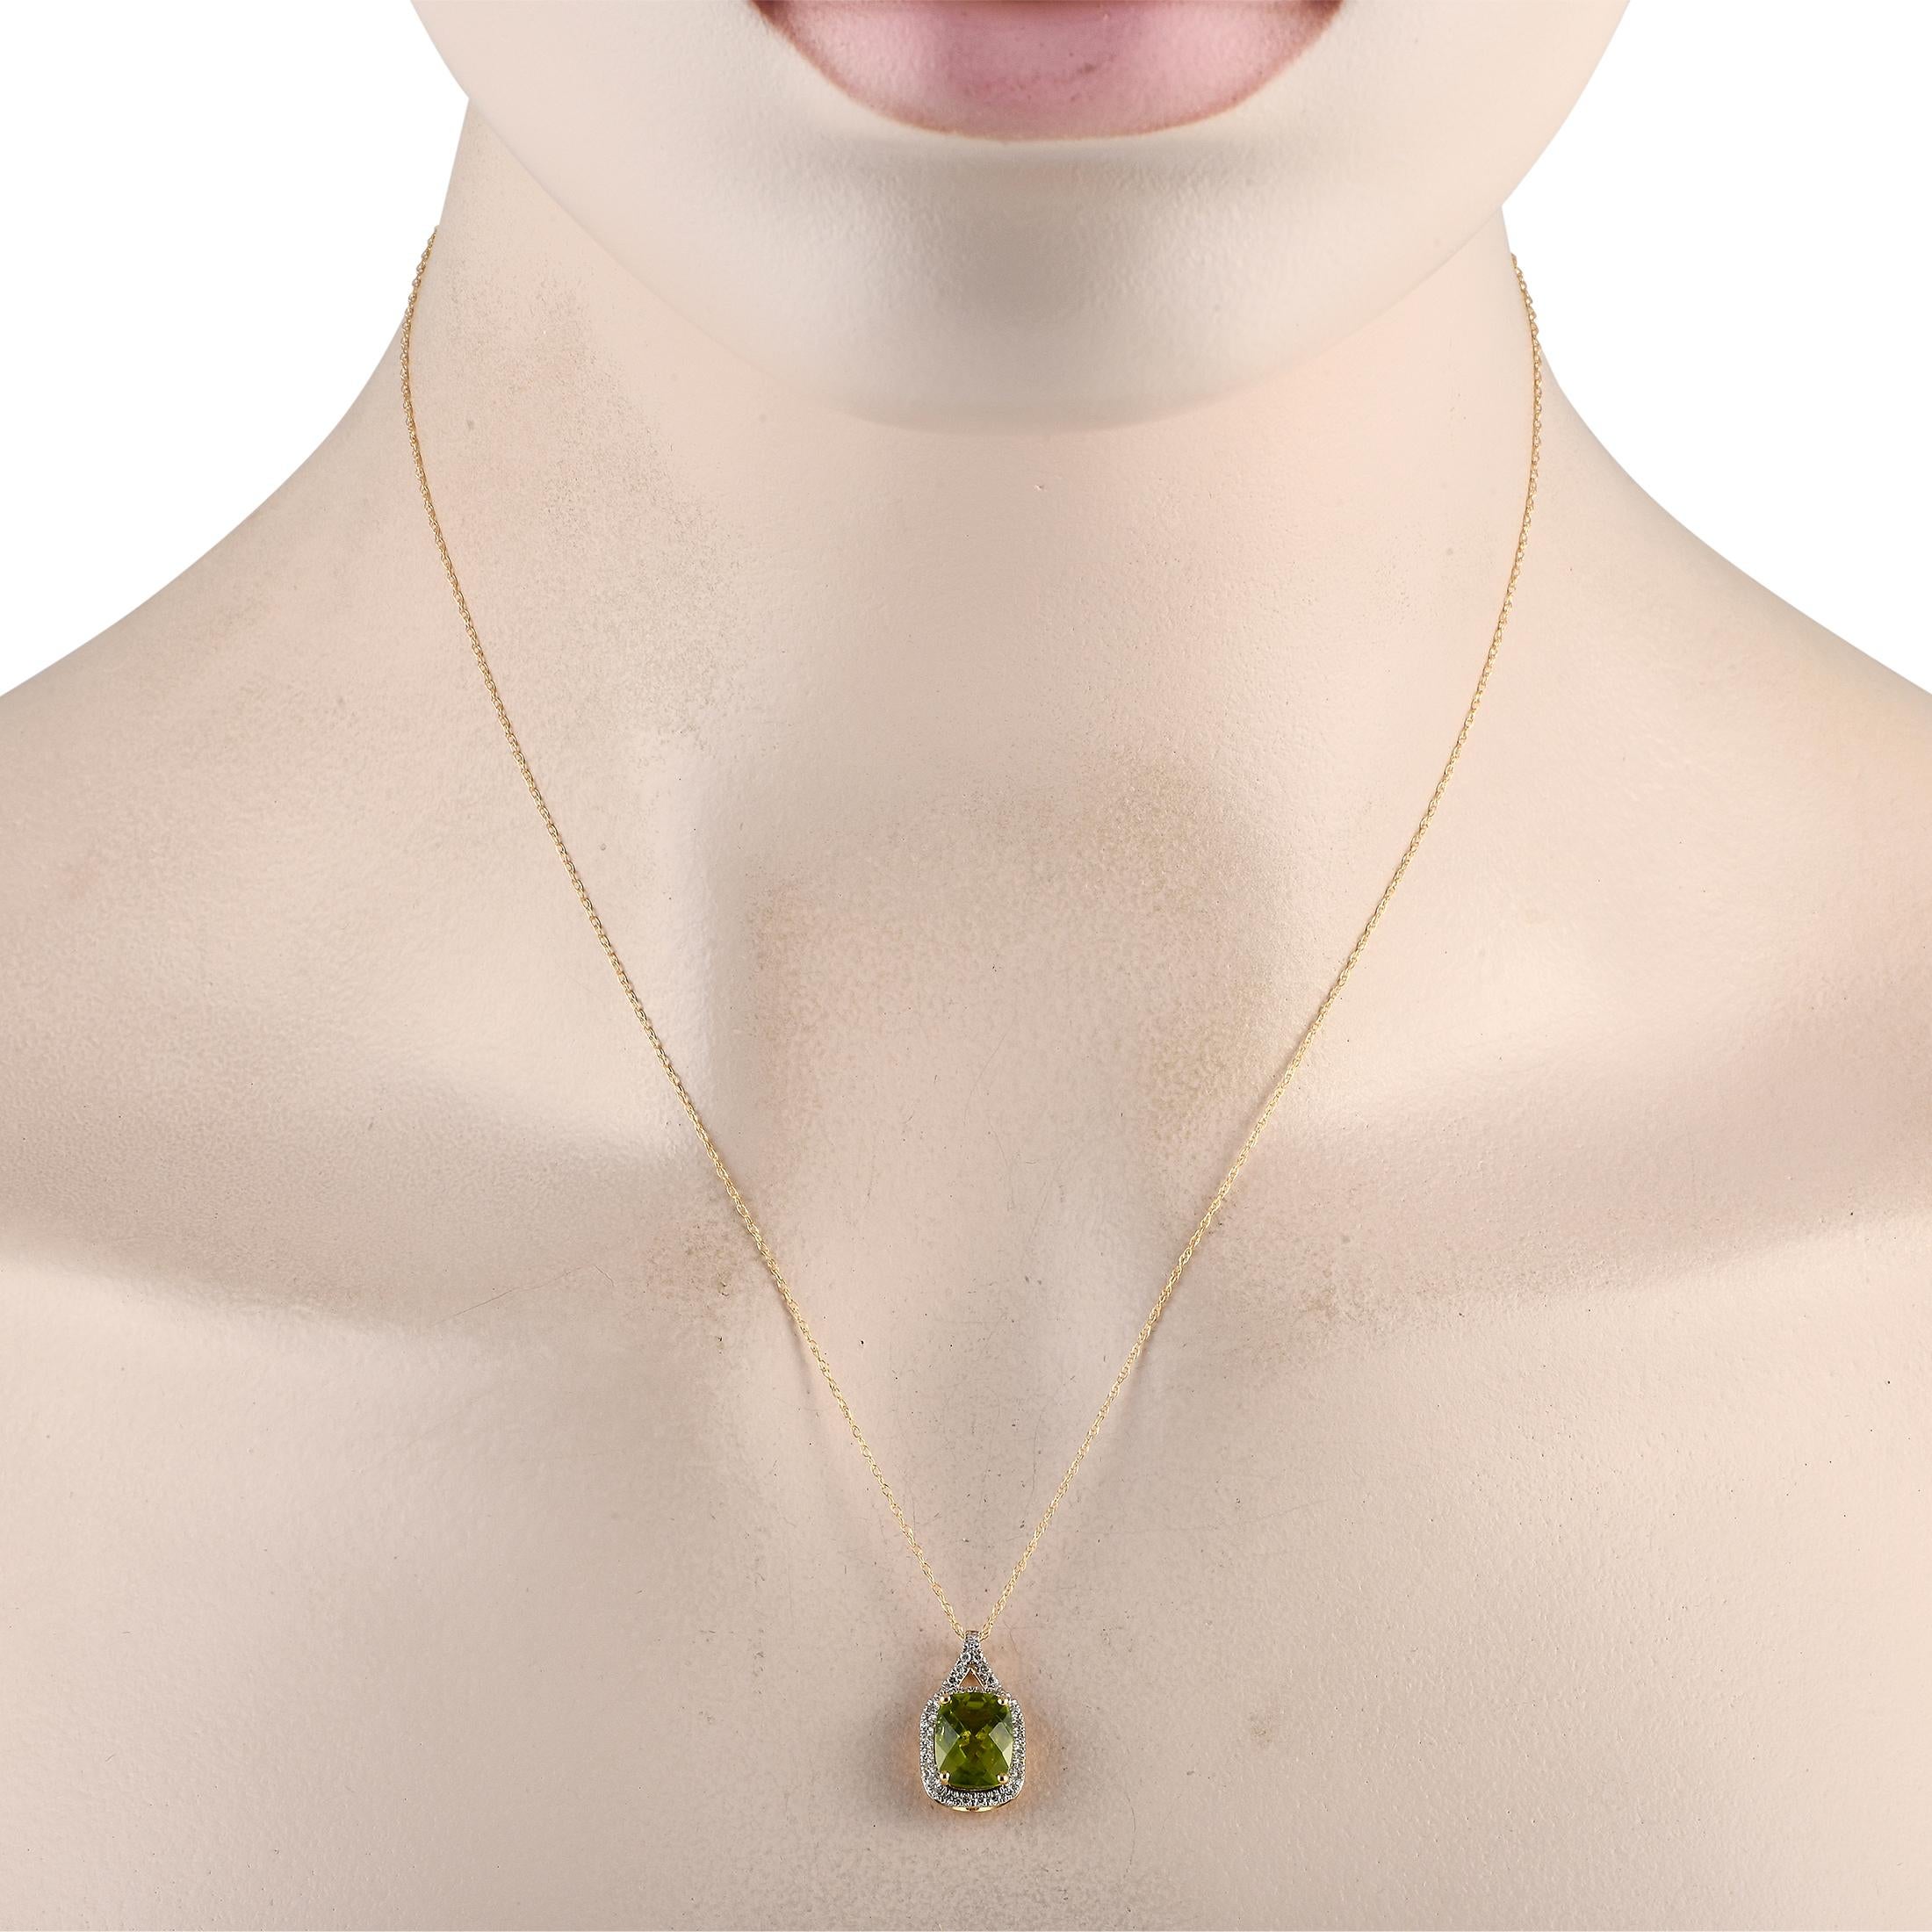 Add a pop of color to any ensemble with this simple, elegant necklace. On this pieces 14K yellow gold pendant, a stunning peridot center stone is surrounded by diamond accents totaling 0.13 carats. The pendant measures 0.75 long by 0.45 wide and is